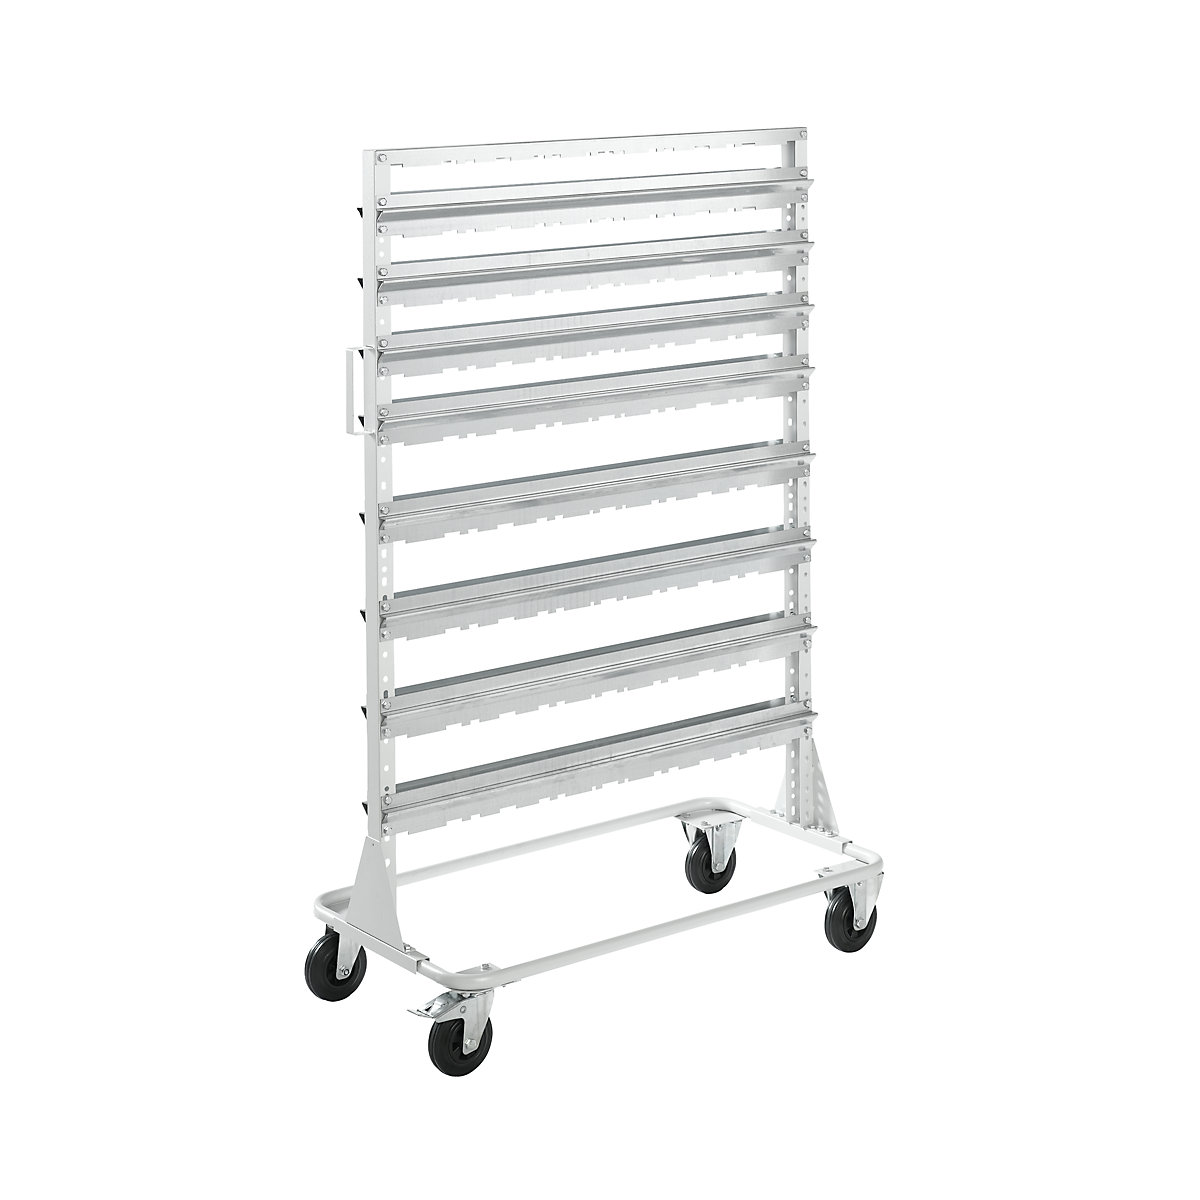 Mobile rack, height 1588 mm, mobile rack for 112 open fronted storage bins, light grey-4